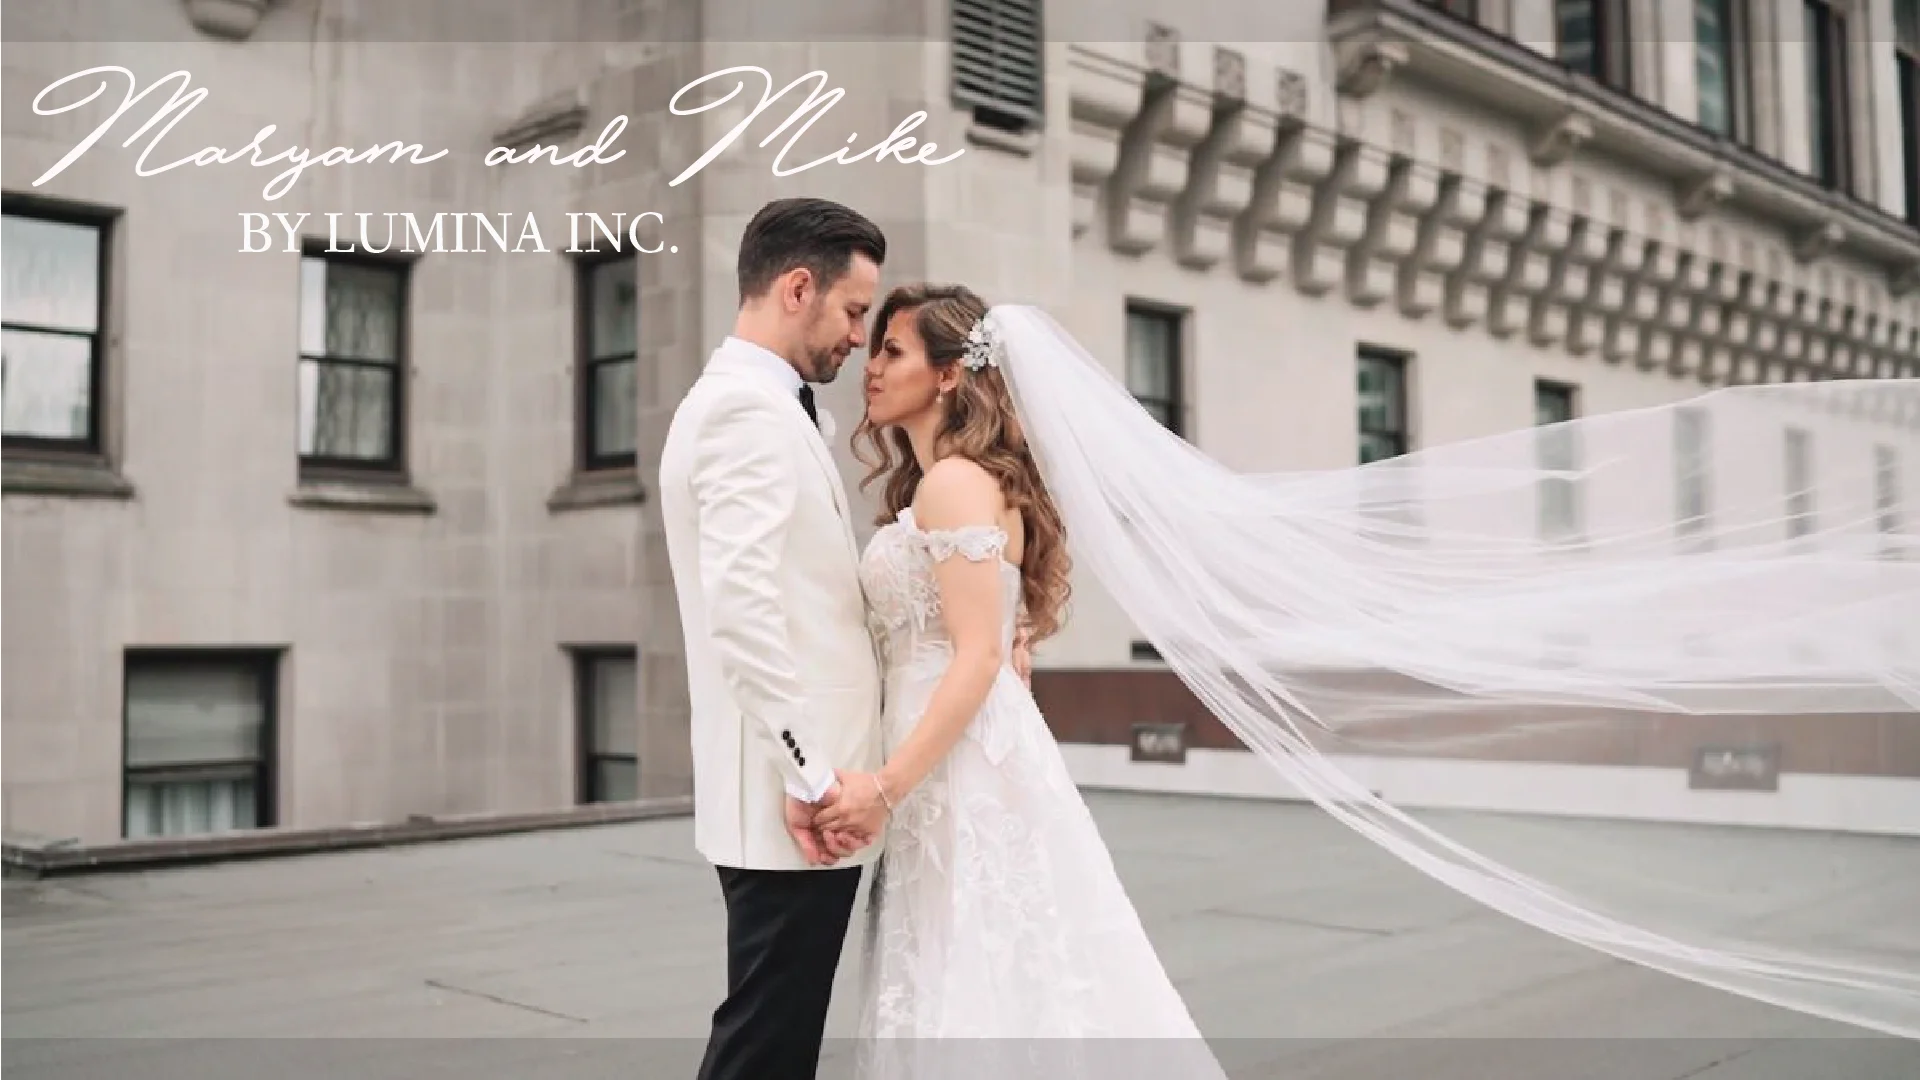 Lumina Weddings and Events Inc. - Videography - Vancouver 